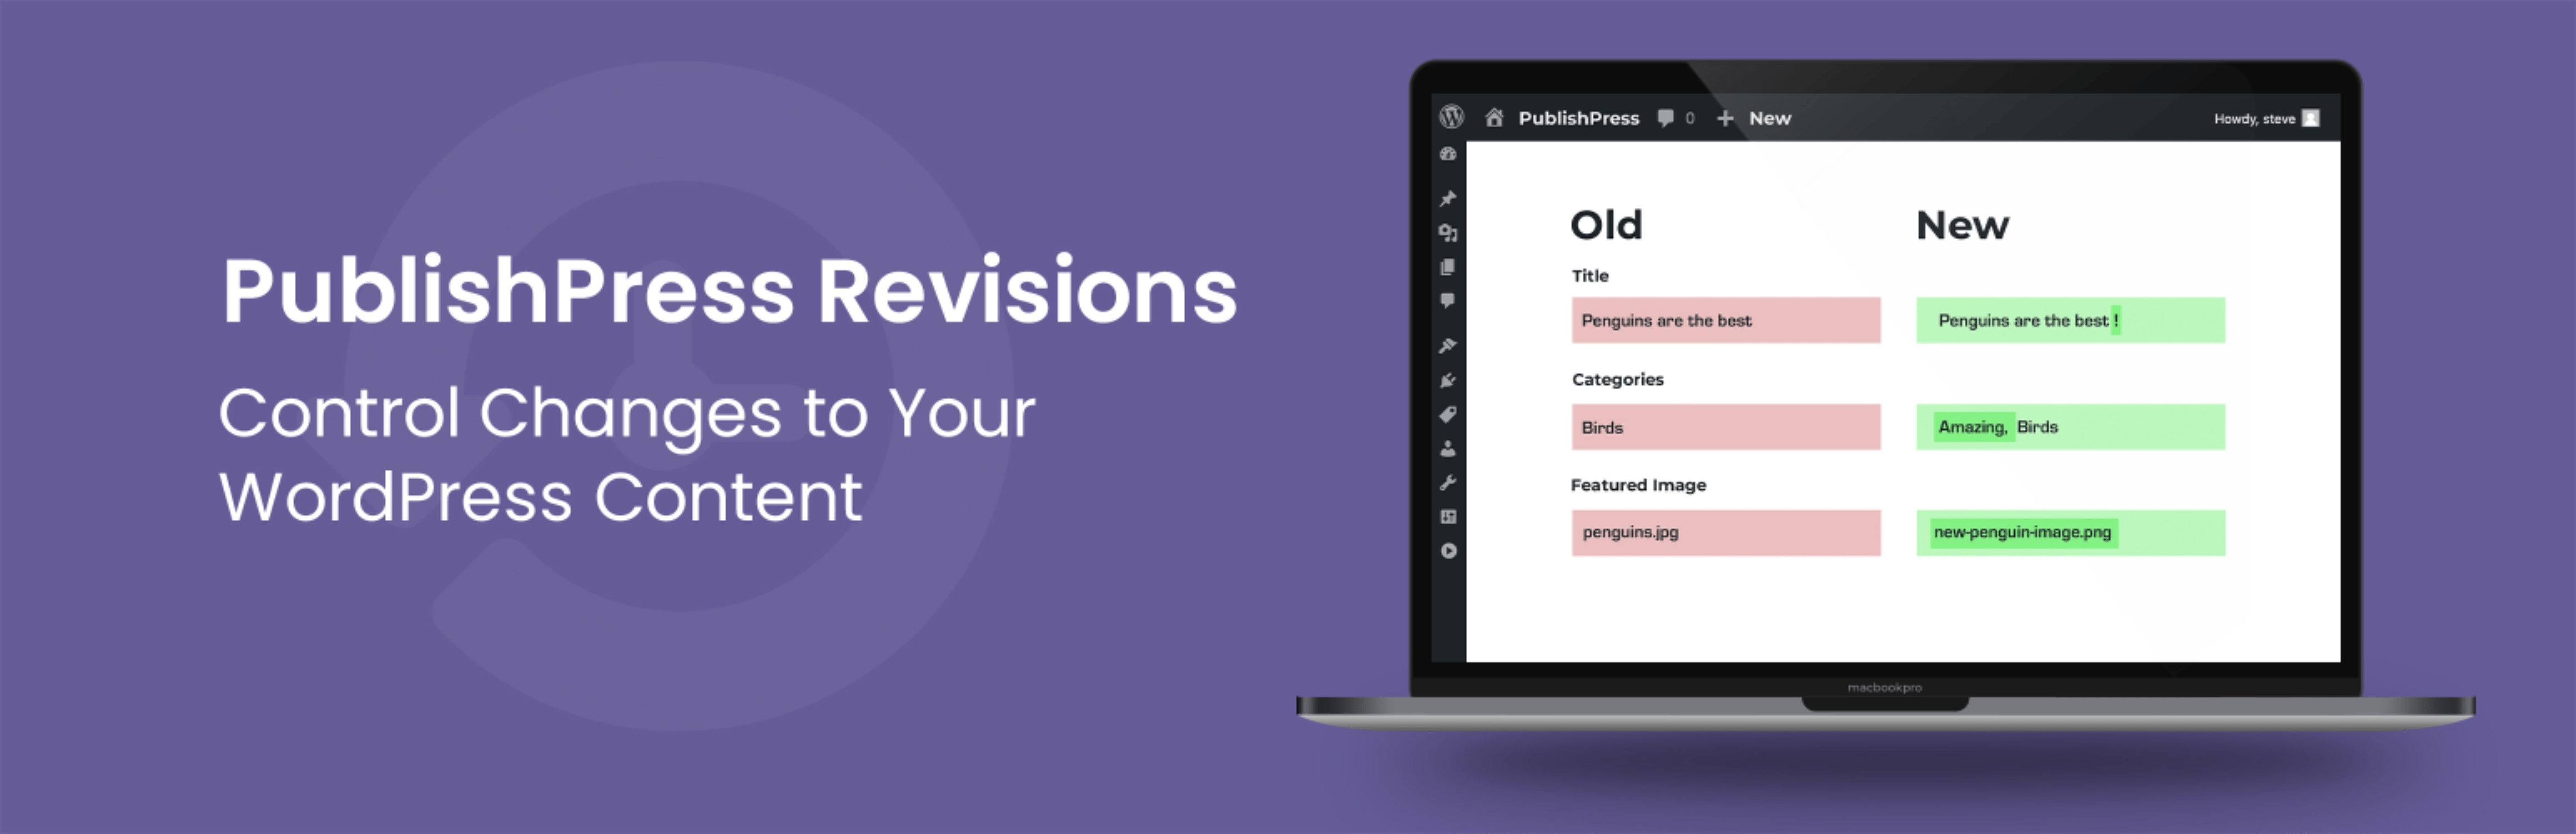 PublishPress Revisions : Duplicate Posts, Submit, Approve and Schedule Content Changes